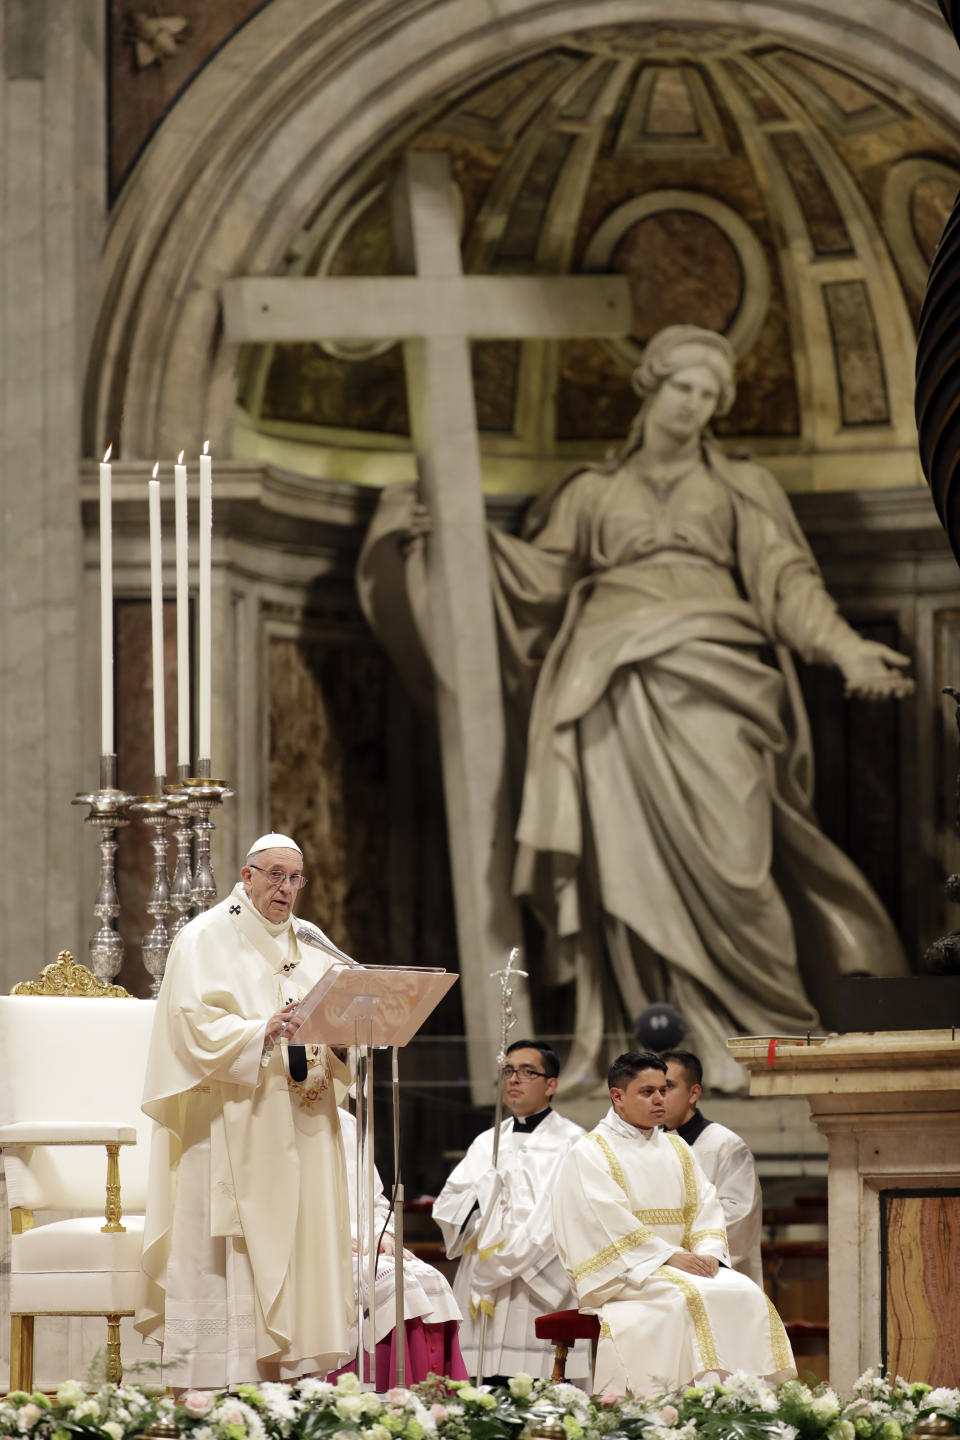 Pope Francis celebrates Mass on the occasion of the feast of Our Lady of Guadalupe, in St. Peter's Basilica at the Vatican, Wednesday, Dec. 12, 2018. (AP Photo/Andrew Medichini)